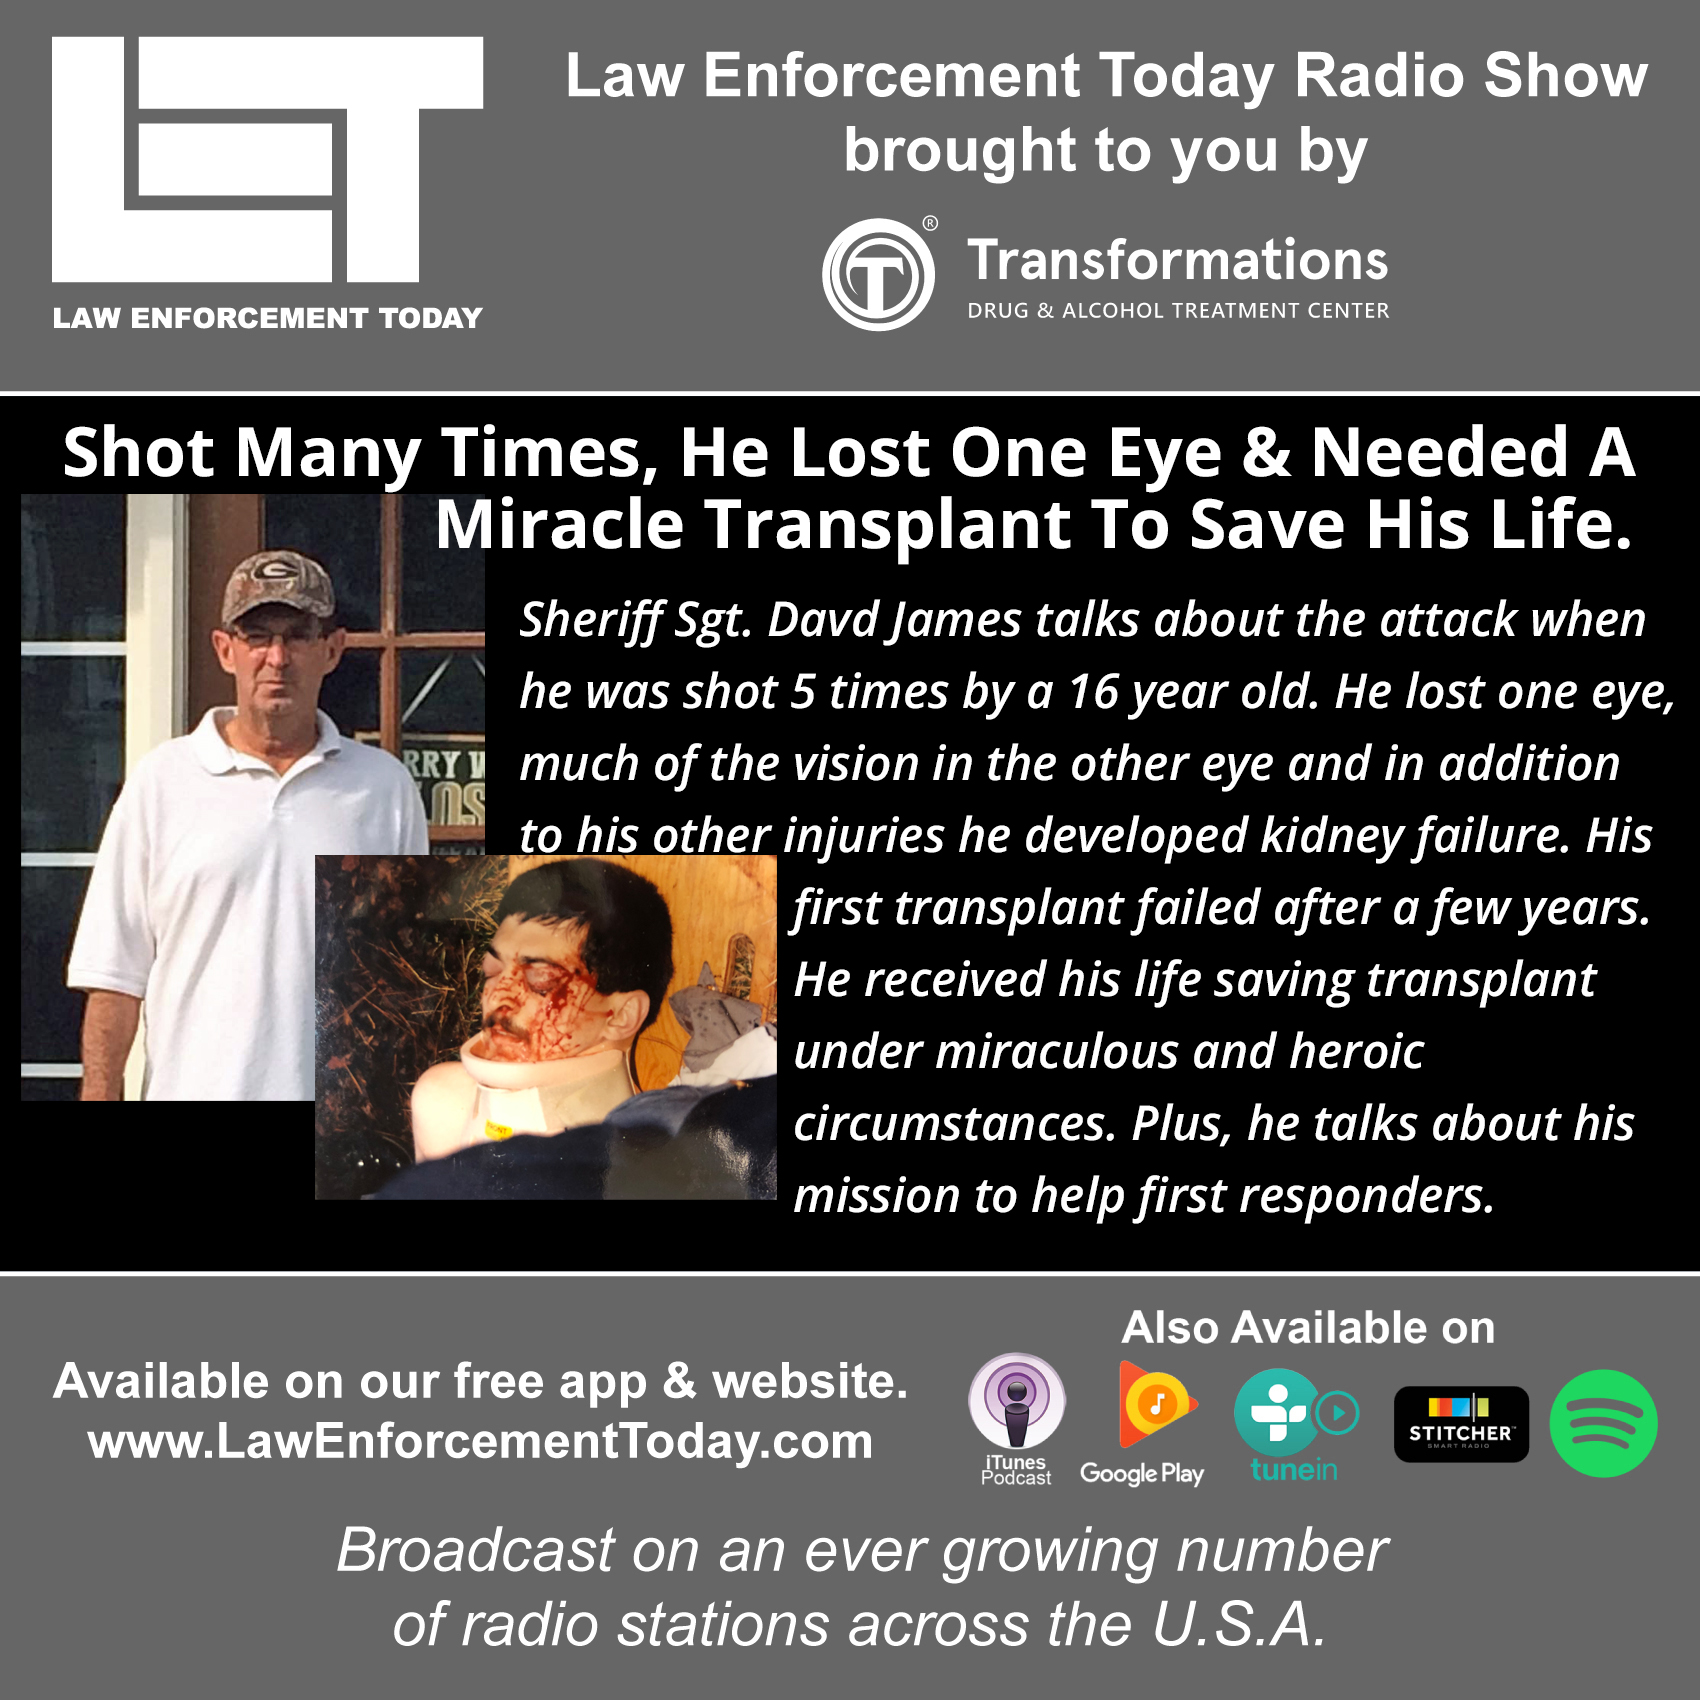 Deputy Sheriff Shot, Lost An Eye And Needed A Miracle Transplant To Save His Life.